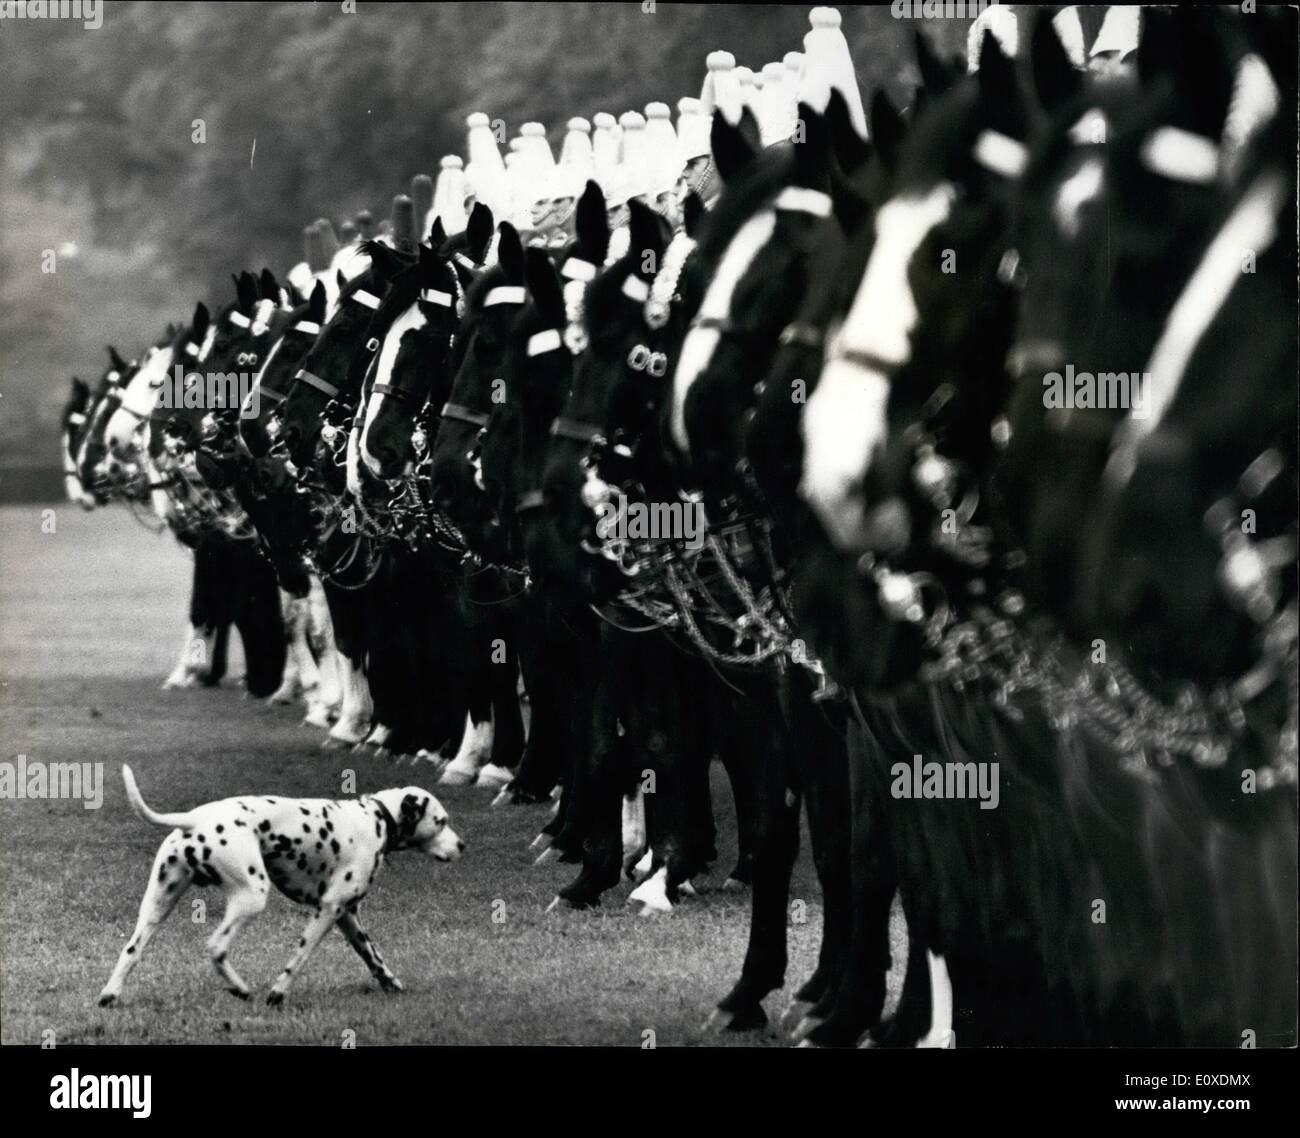 May 05, 1966 - Photo Shows:- A Loose Dog ran among the horses during today's Inspection in Ryde Park Stock Photo